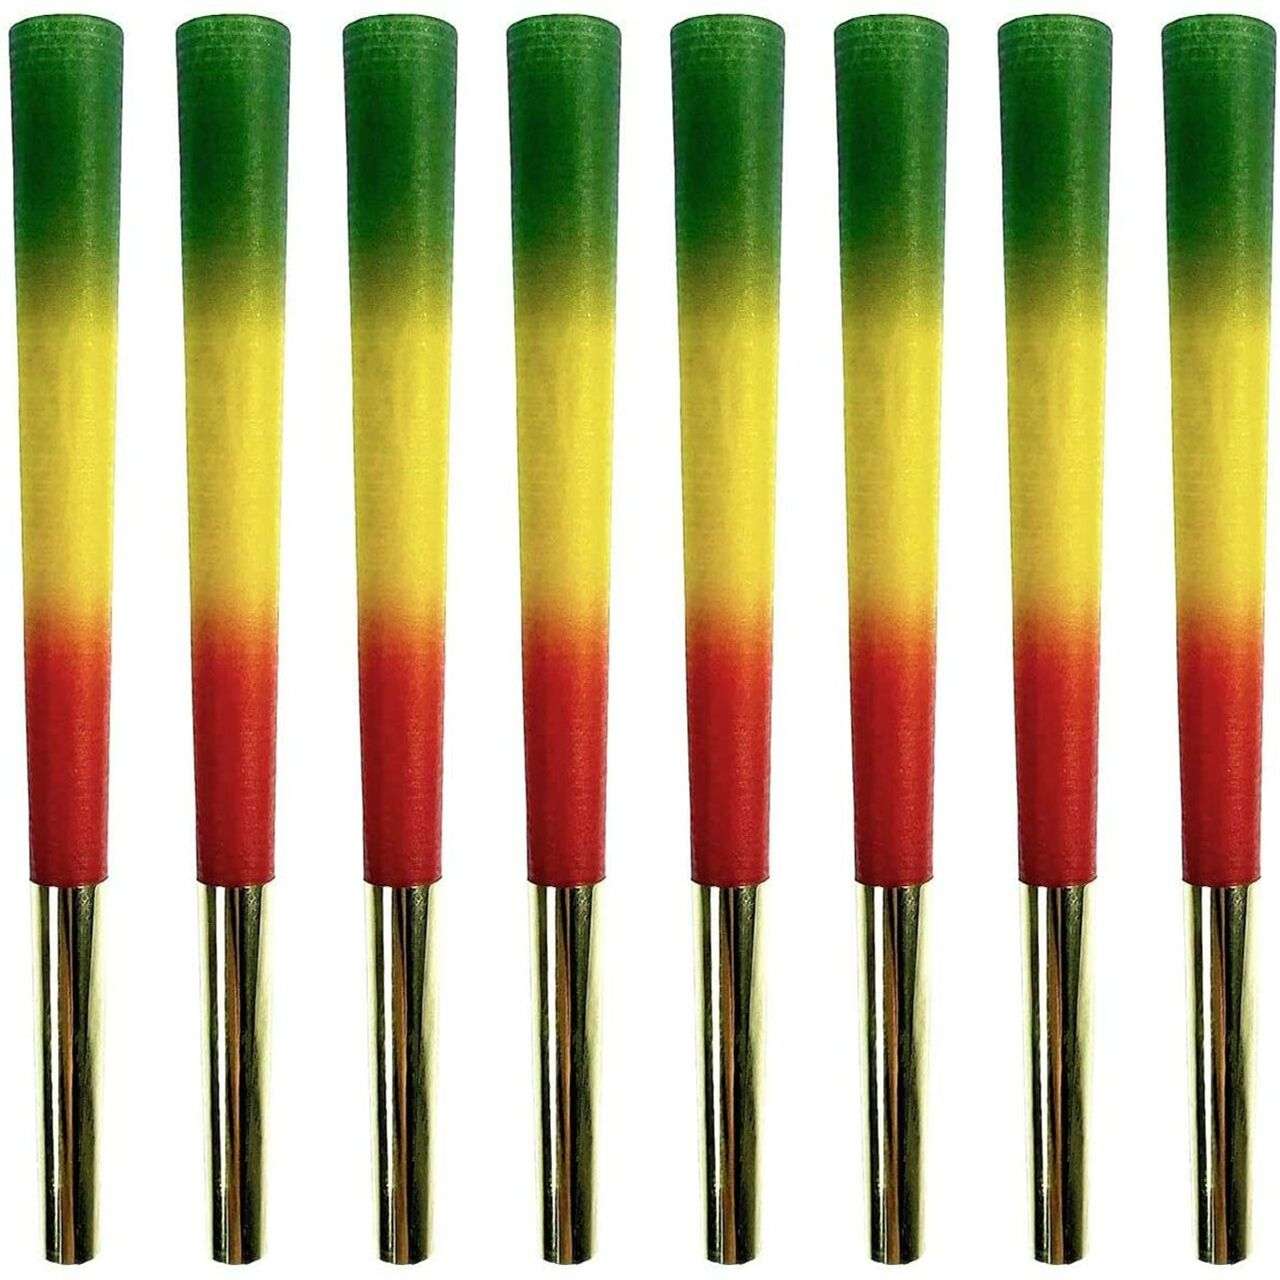 Elephant Brands Pre-Rolled Cones Rasta Gold Tip Pack of 8